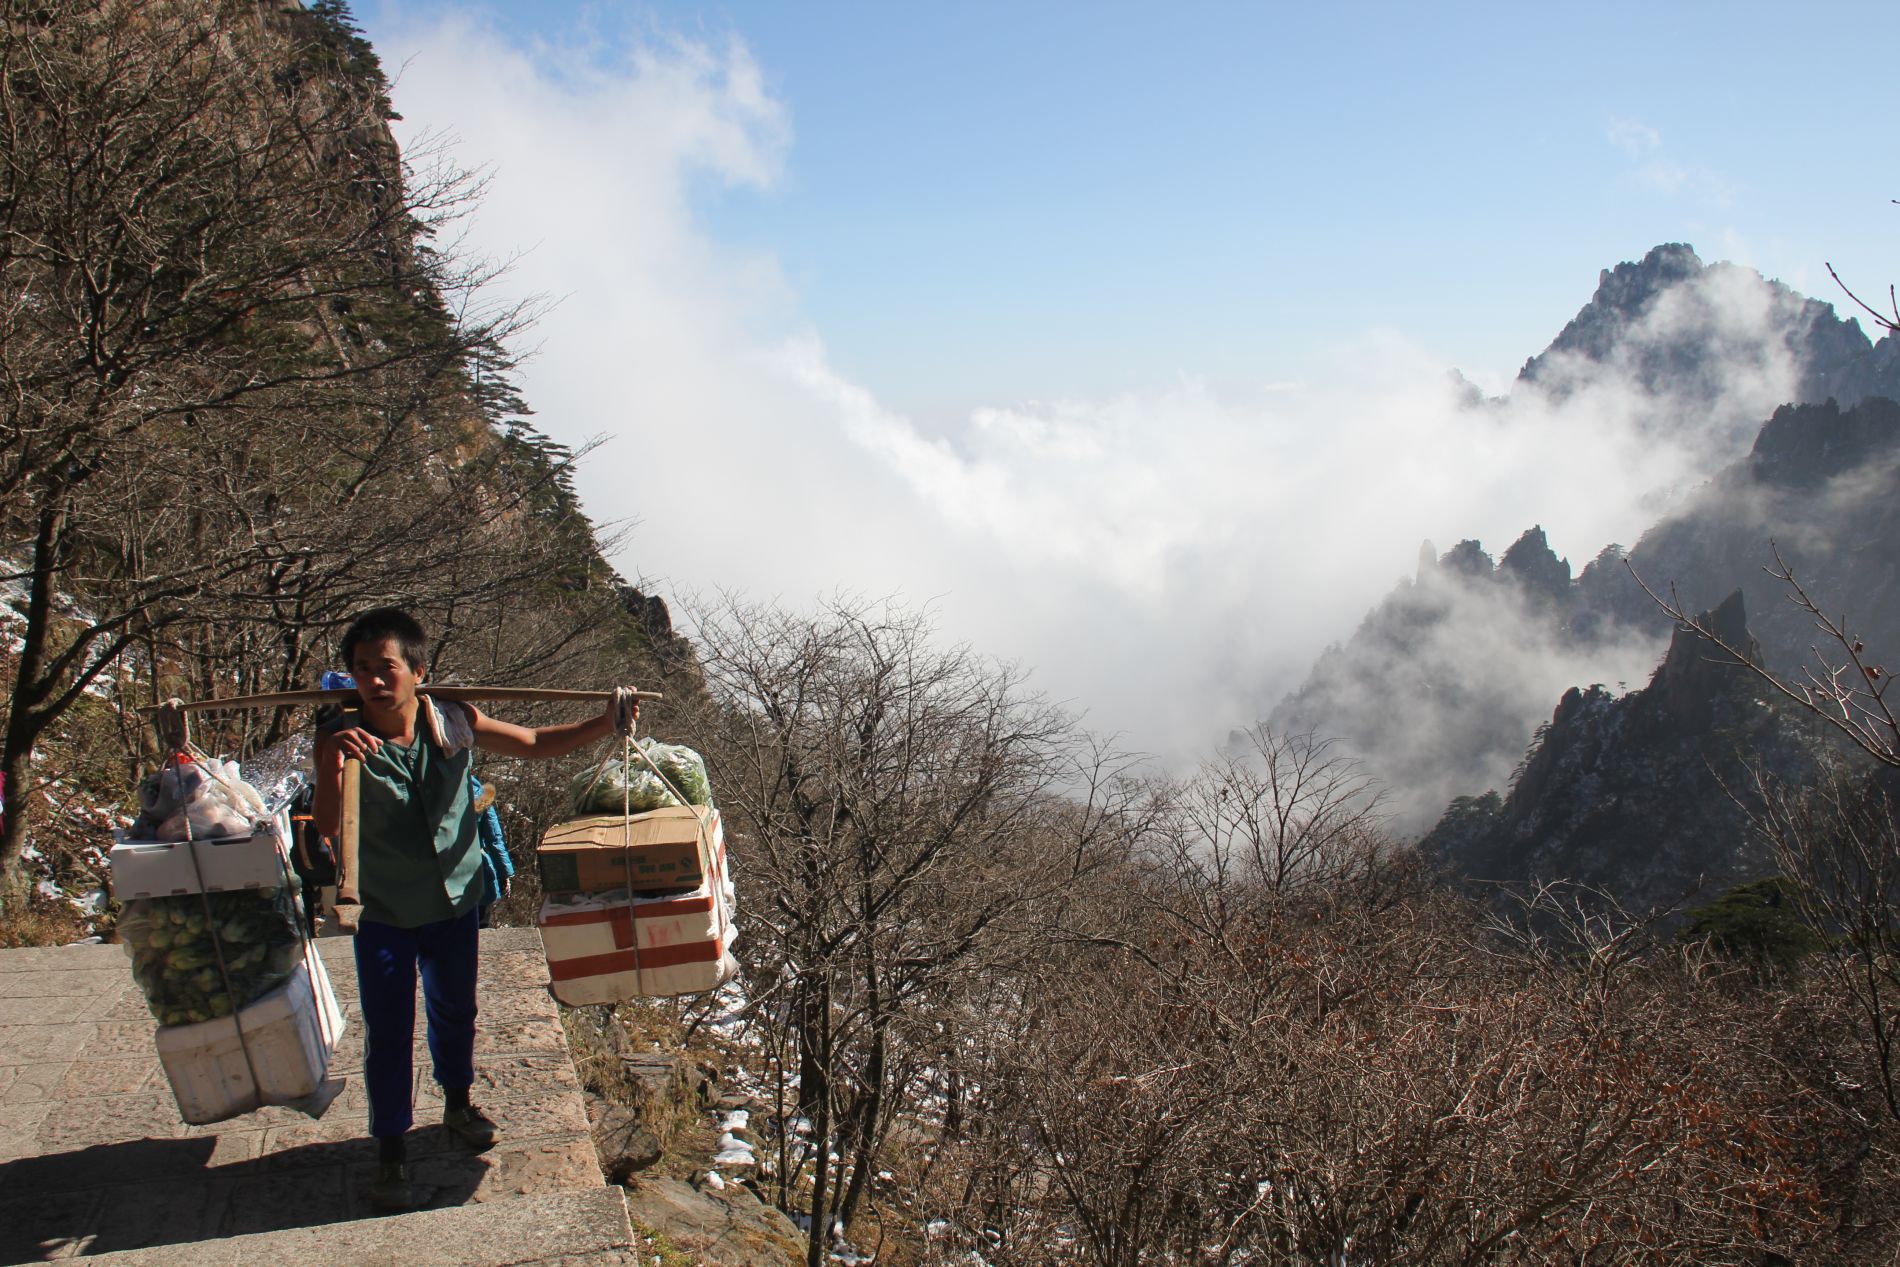 A porter carries food and supplies to hotels atop Huangshan.